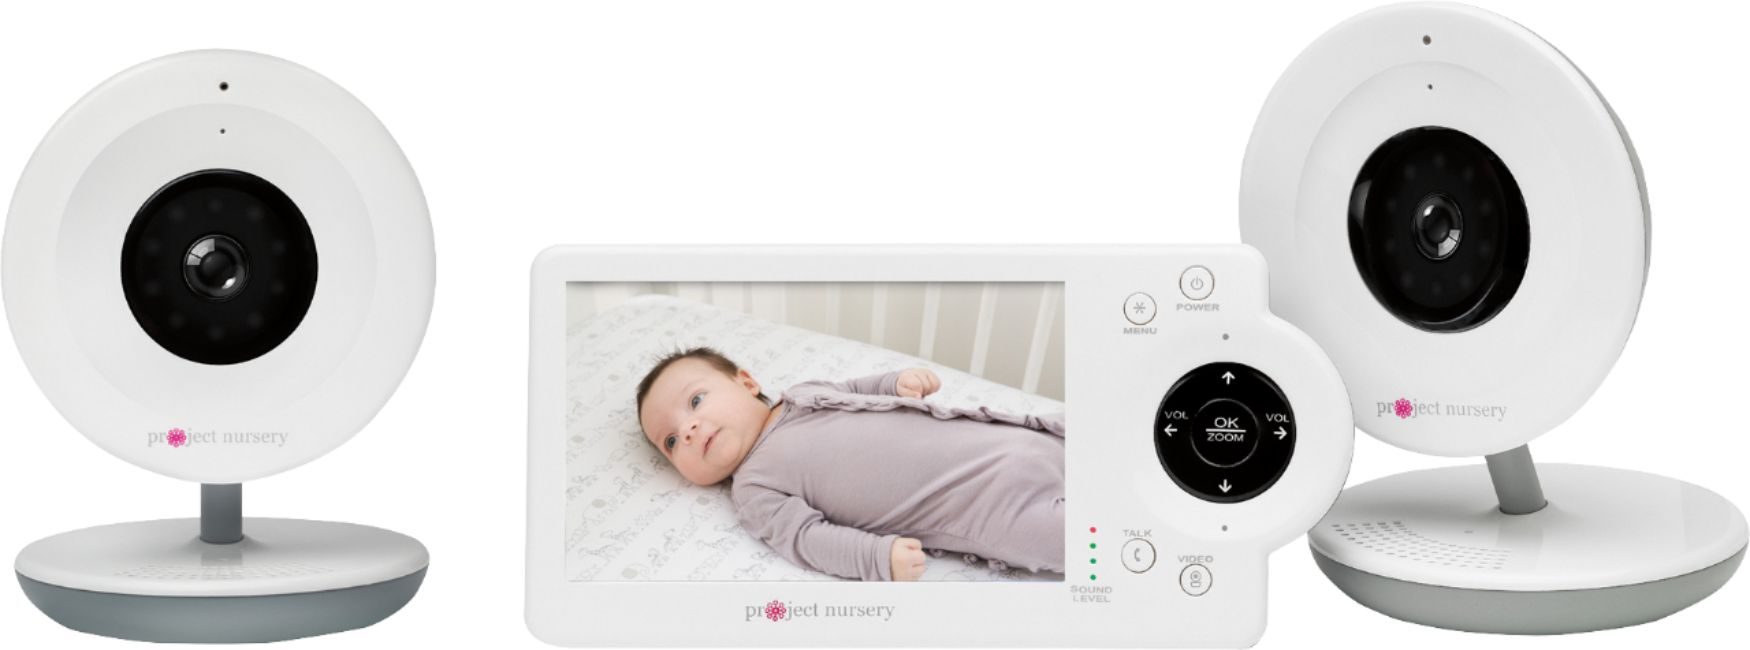 Project Nursery Video Baby Monitor with 